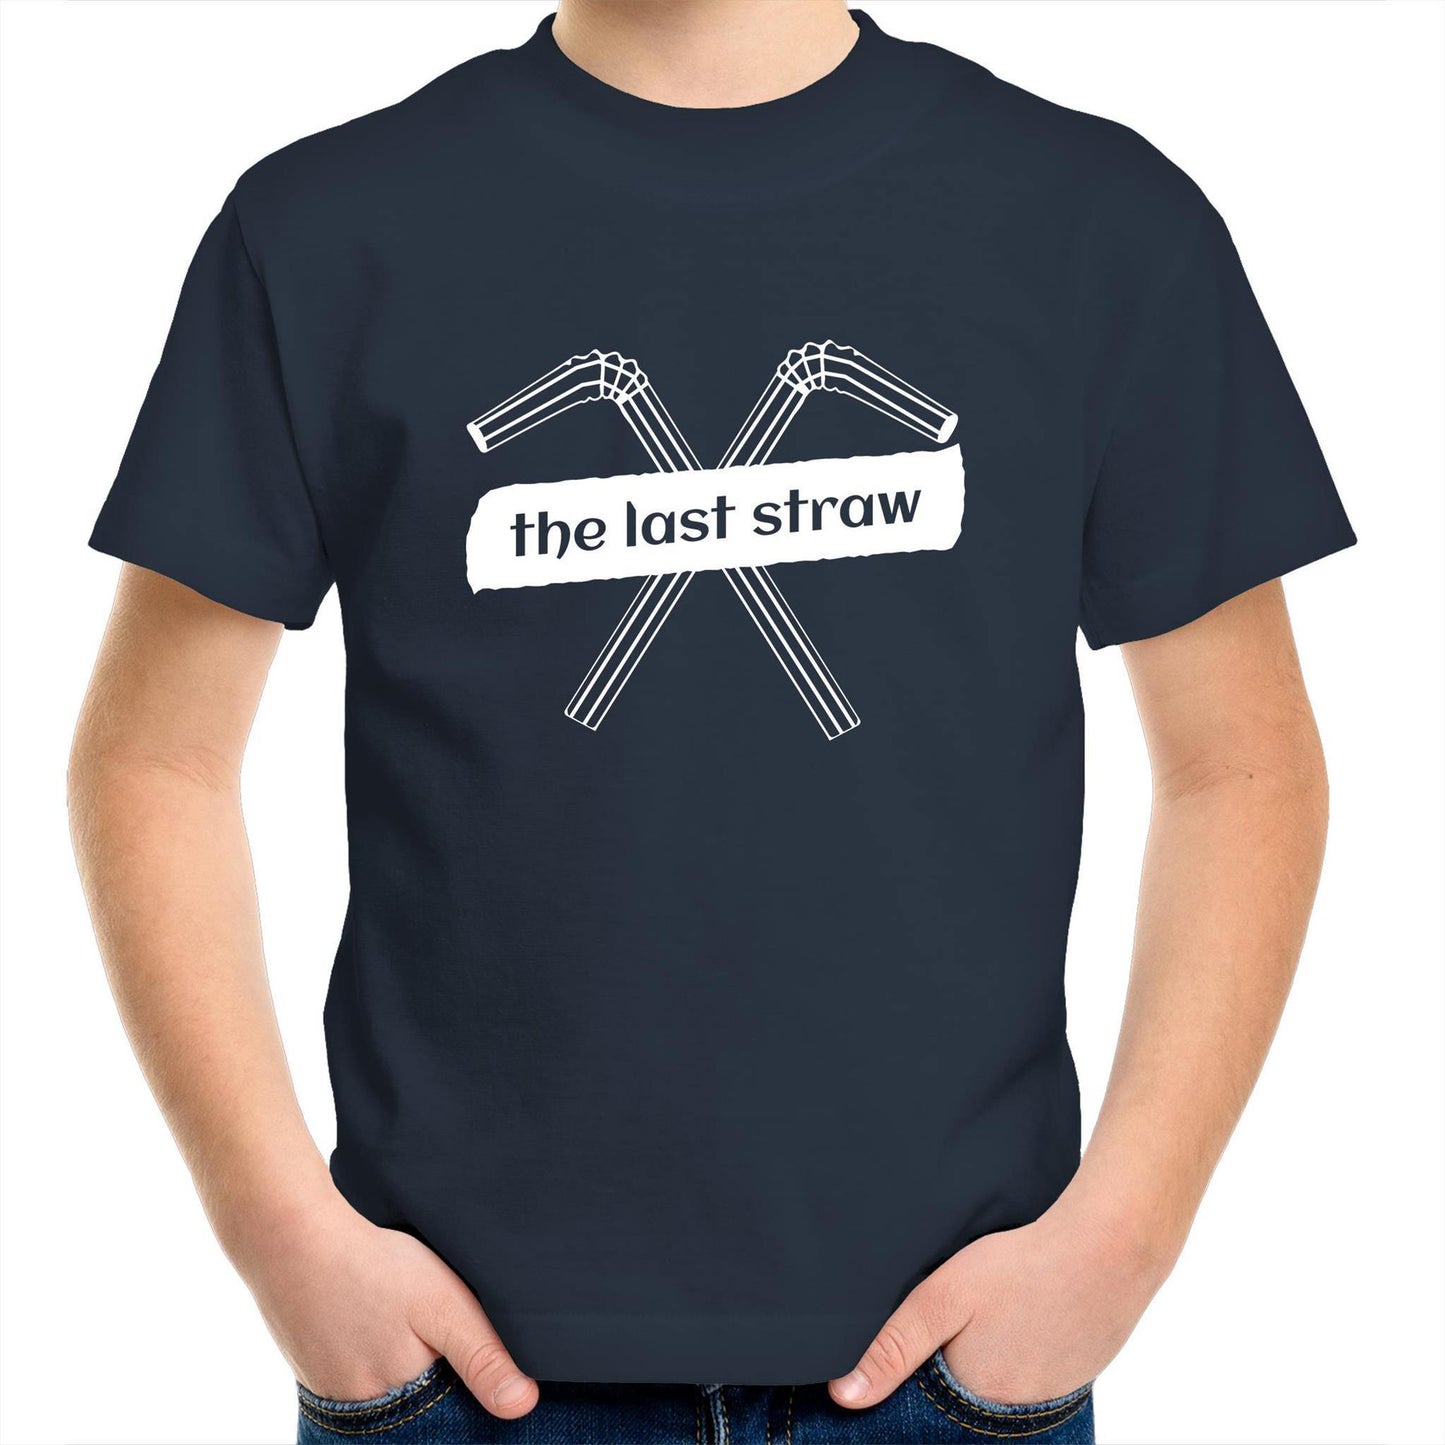 The Last Straw - Kids Youth Crew T-Shirt Navy Kids Youth T-shirt Environment